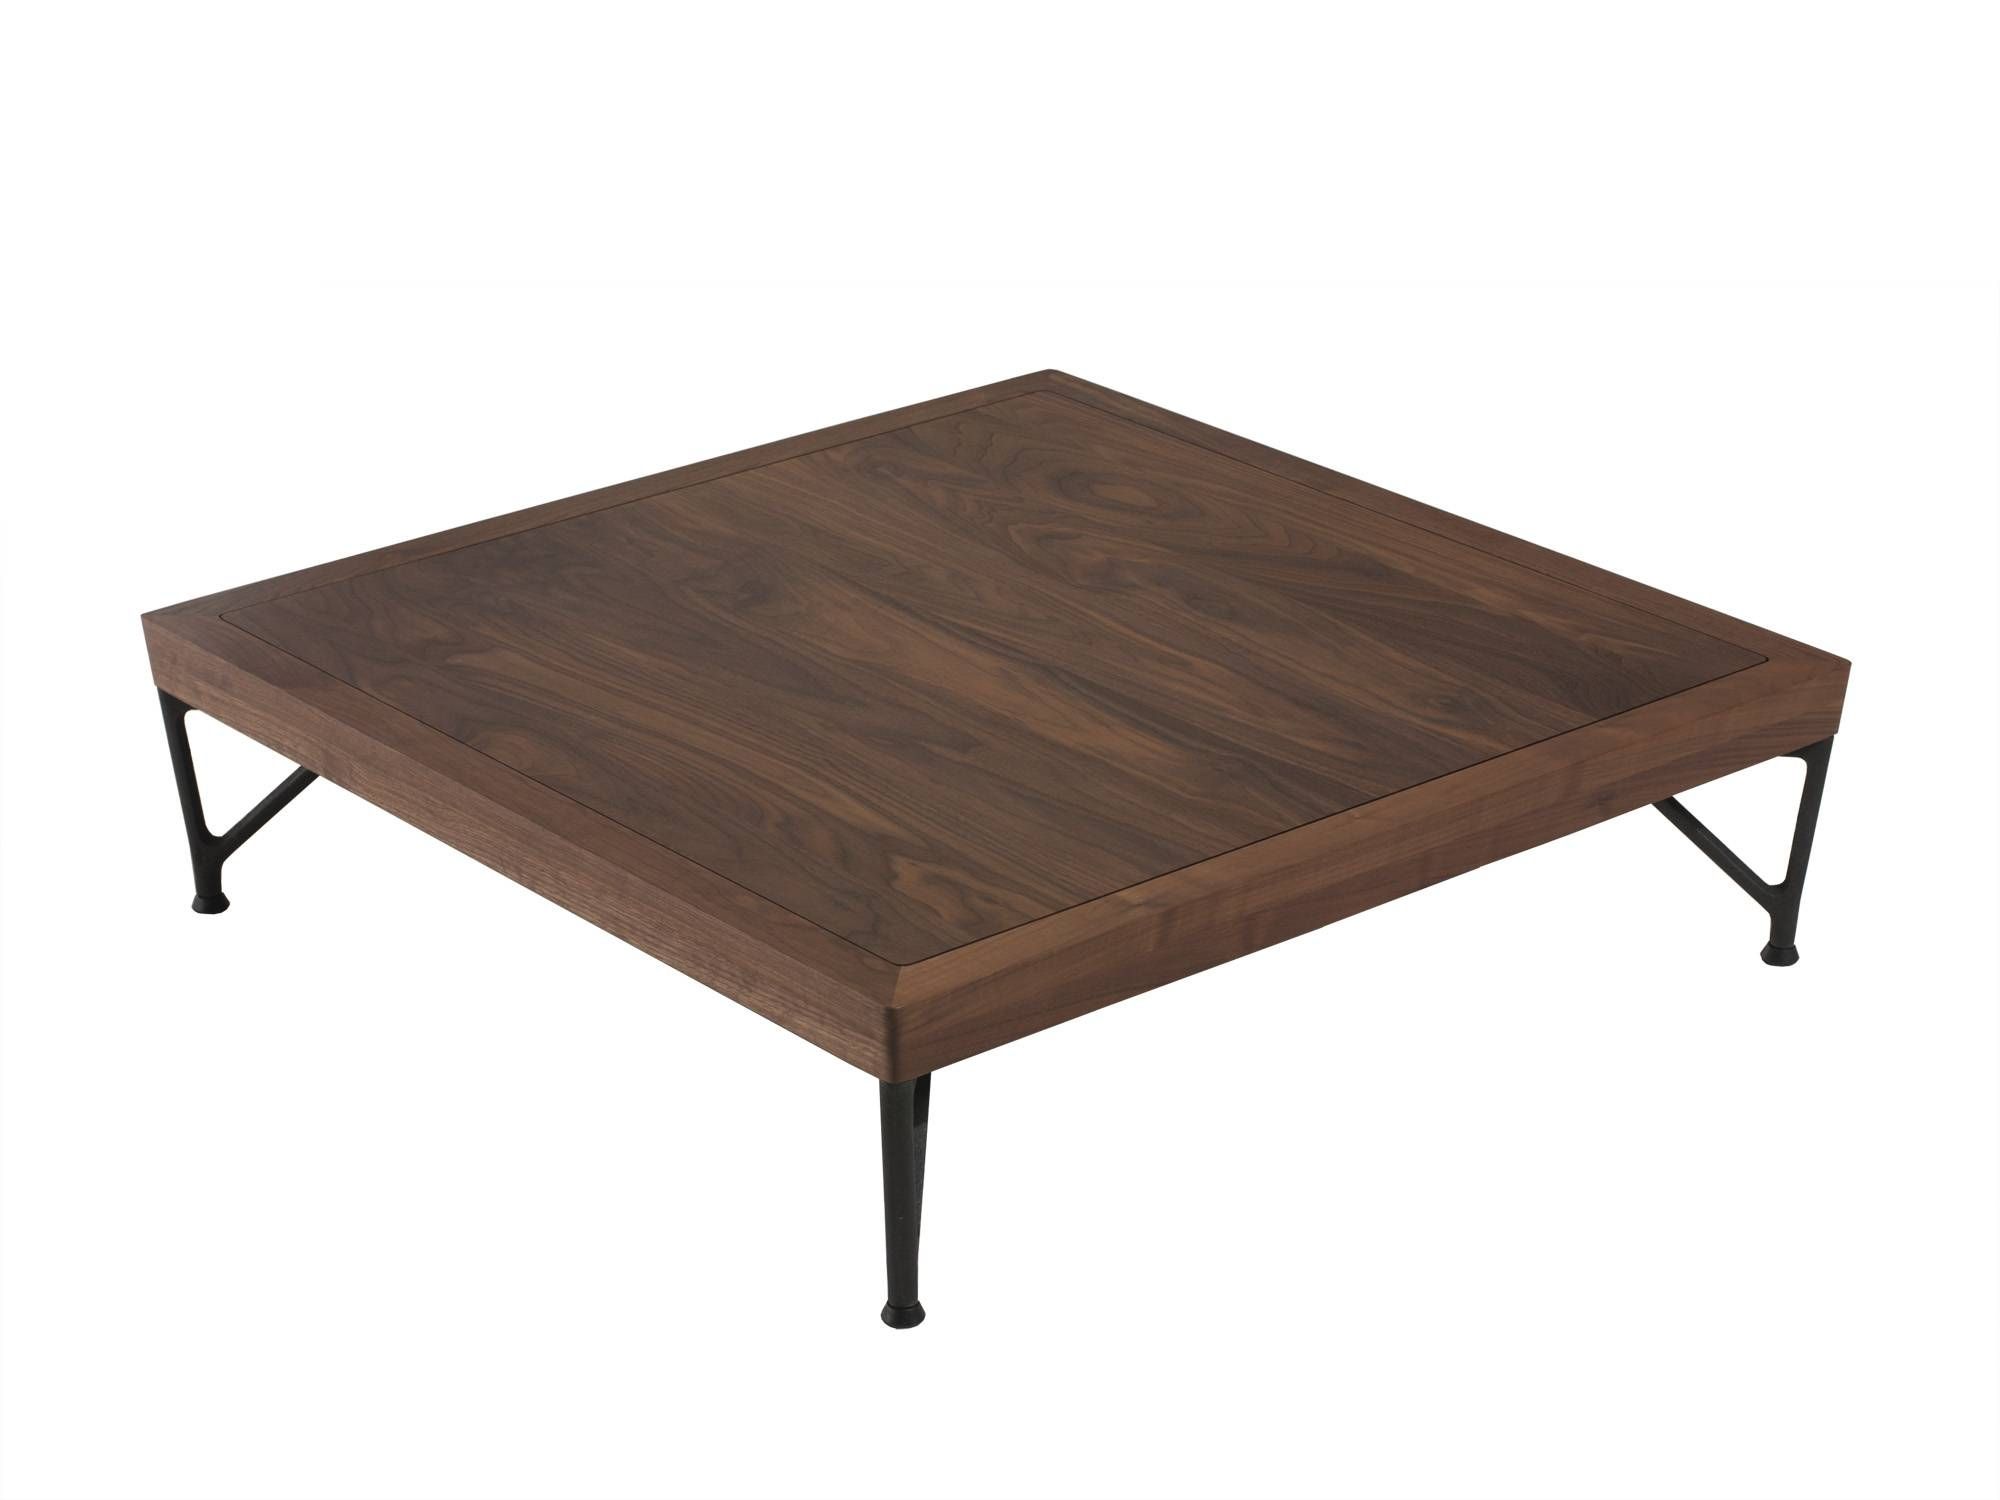 Large Square Coffee Table With Glass Top | Coffee Tables Decoration Intended For Square Dark Wood Coffee Tables (View 11 of 30)